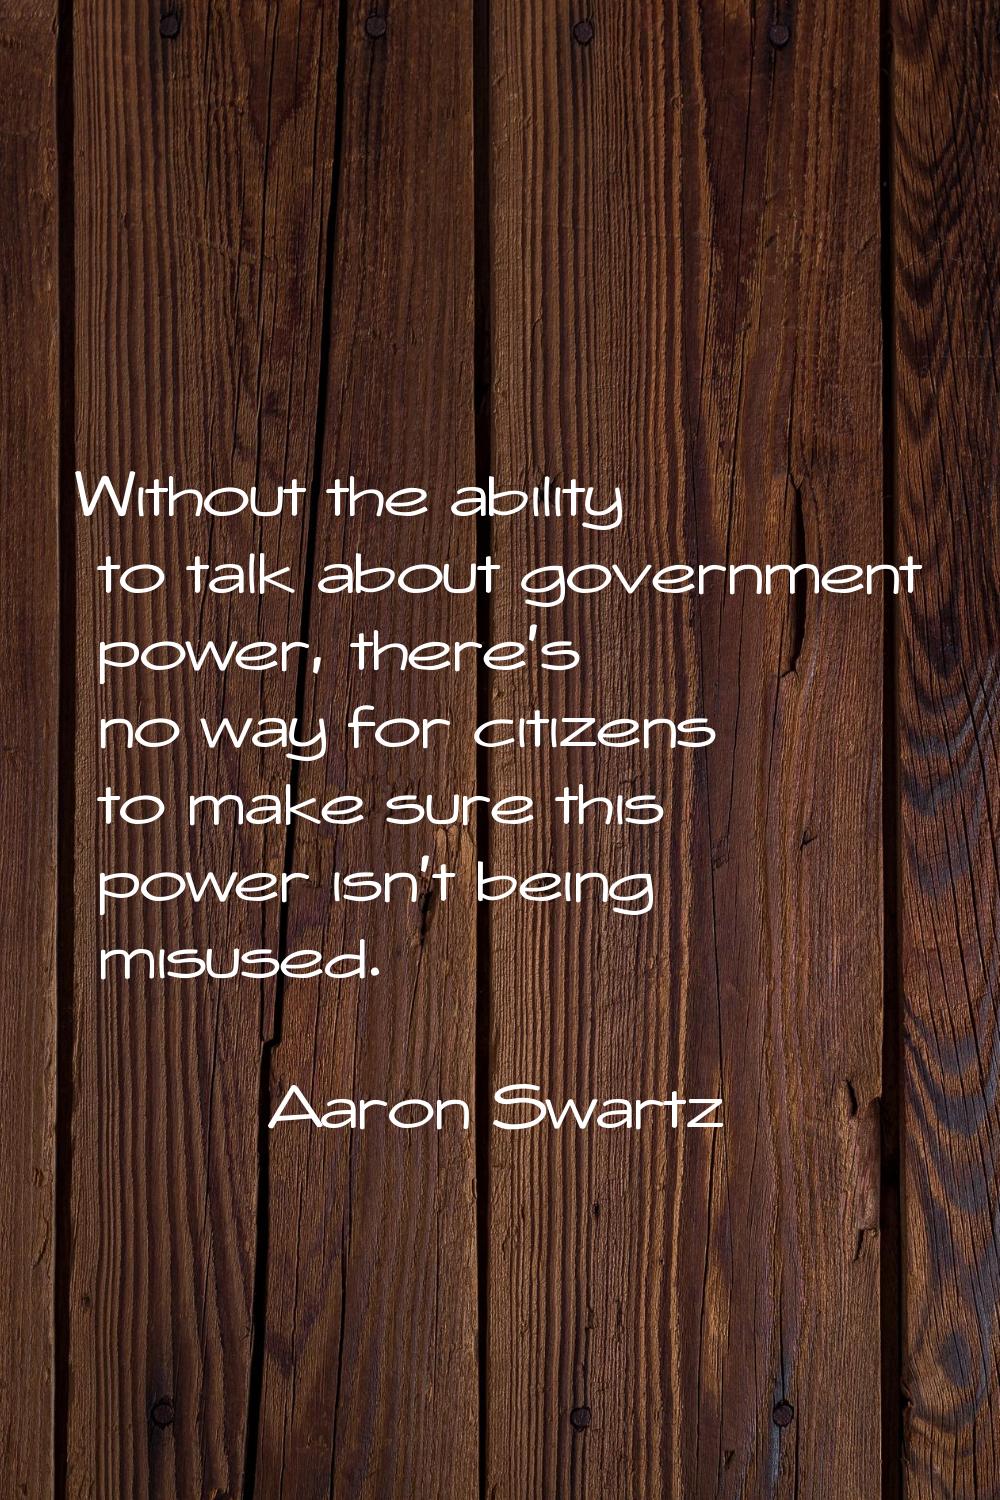 Without the ability to talk about government power, there's no way for citizens to make sure this p